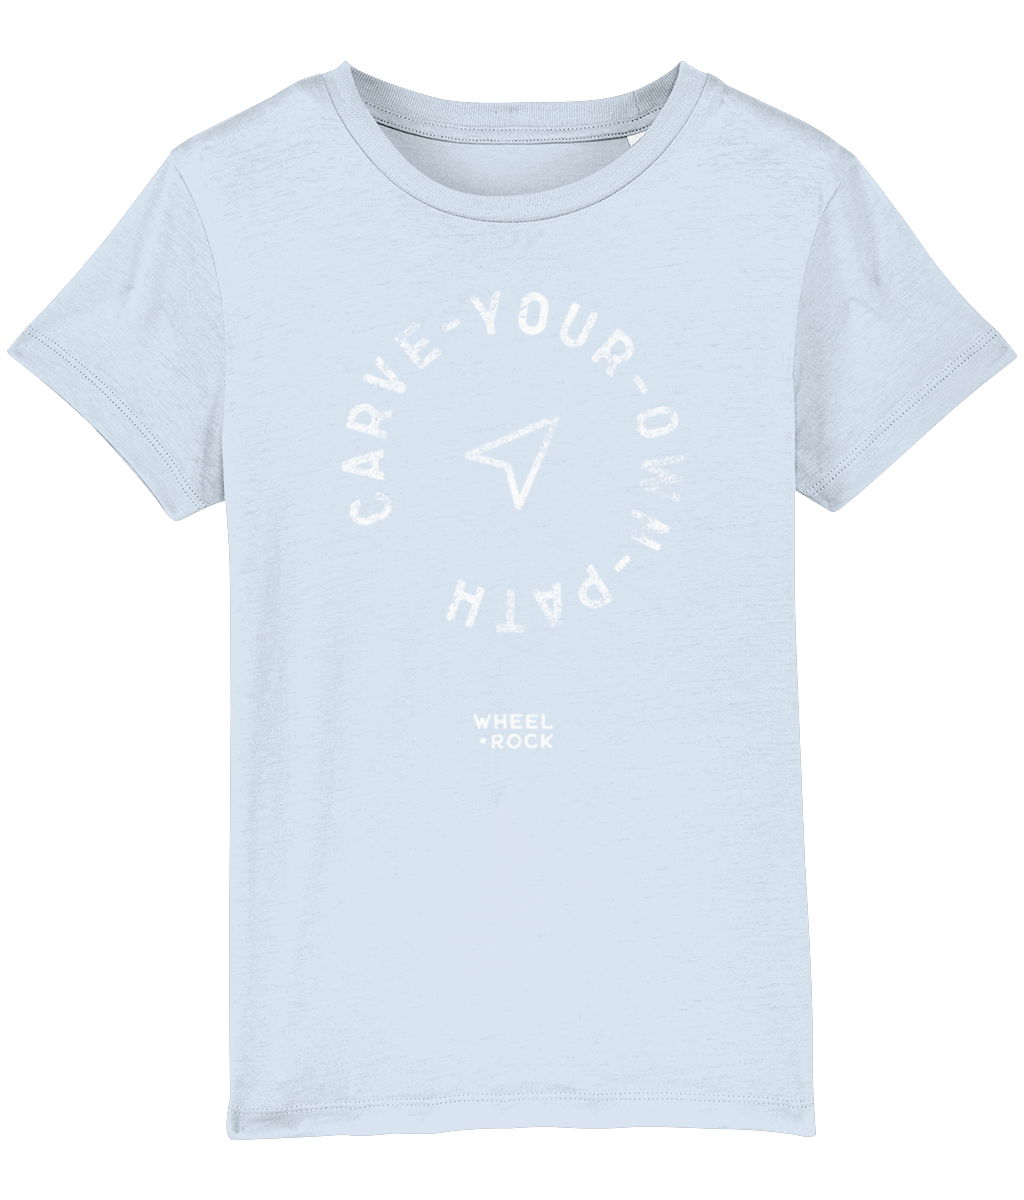 Carve Your Own Path - Kids Tee - BLUES